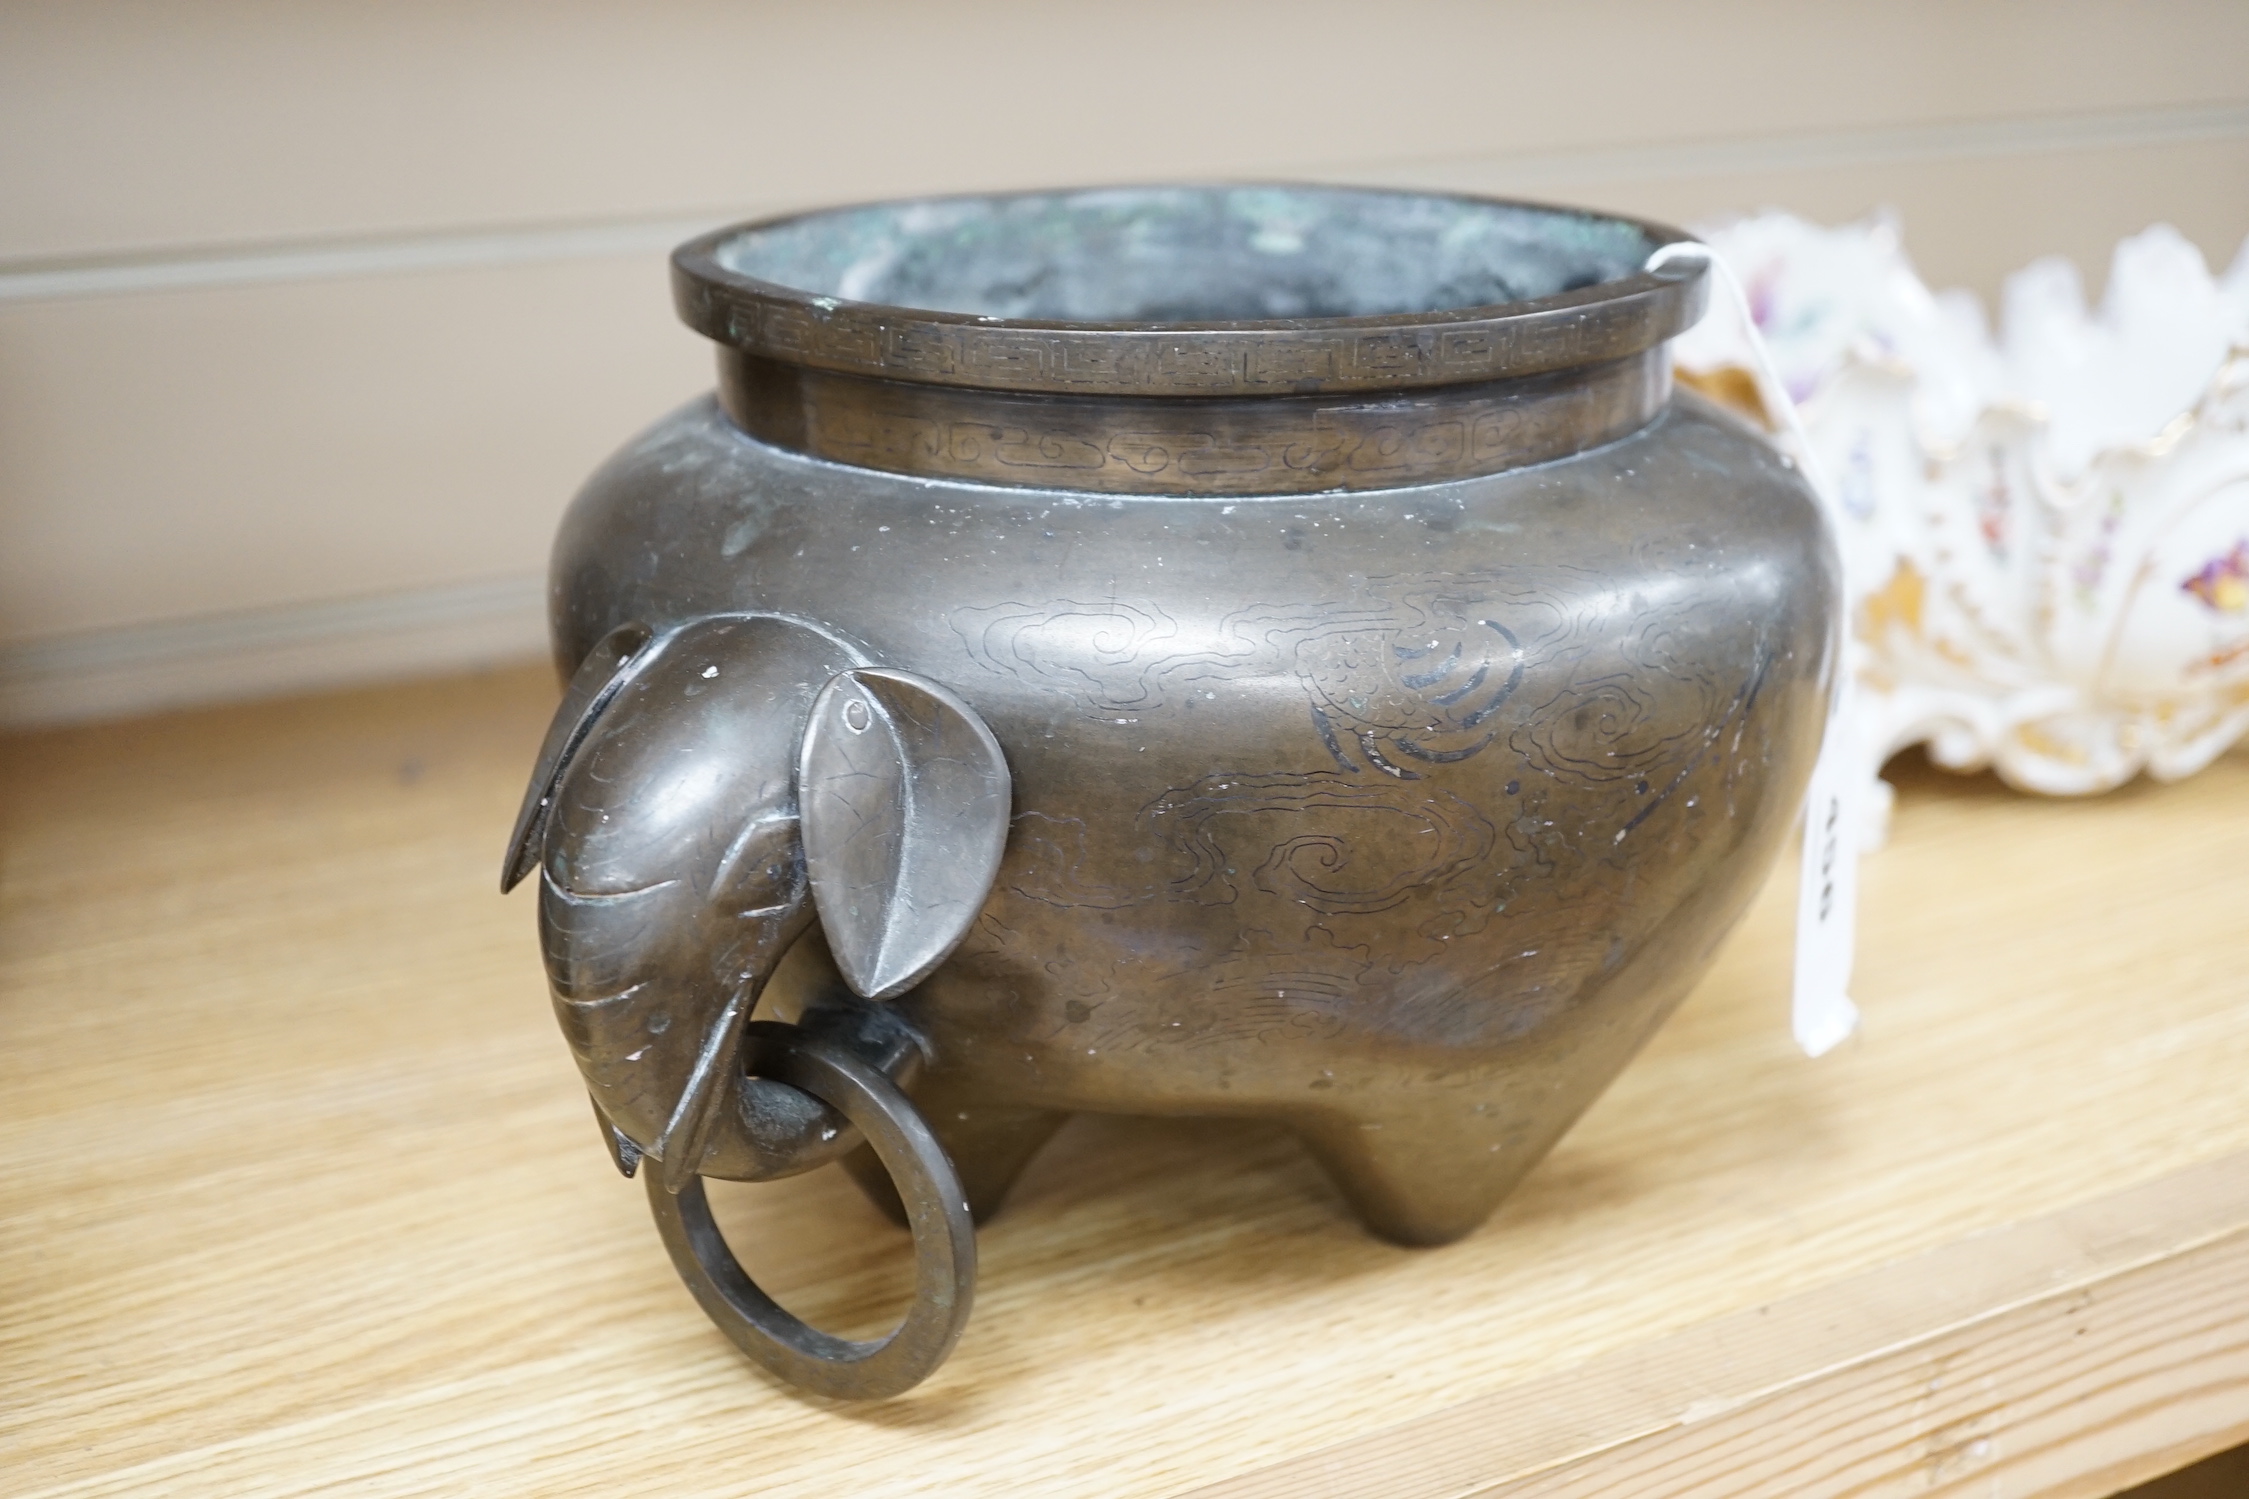 A large Chinese silver inlaid bronze elephant handled censer, signed Sishou, 19th century, 16cms high, 29cm wide